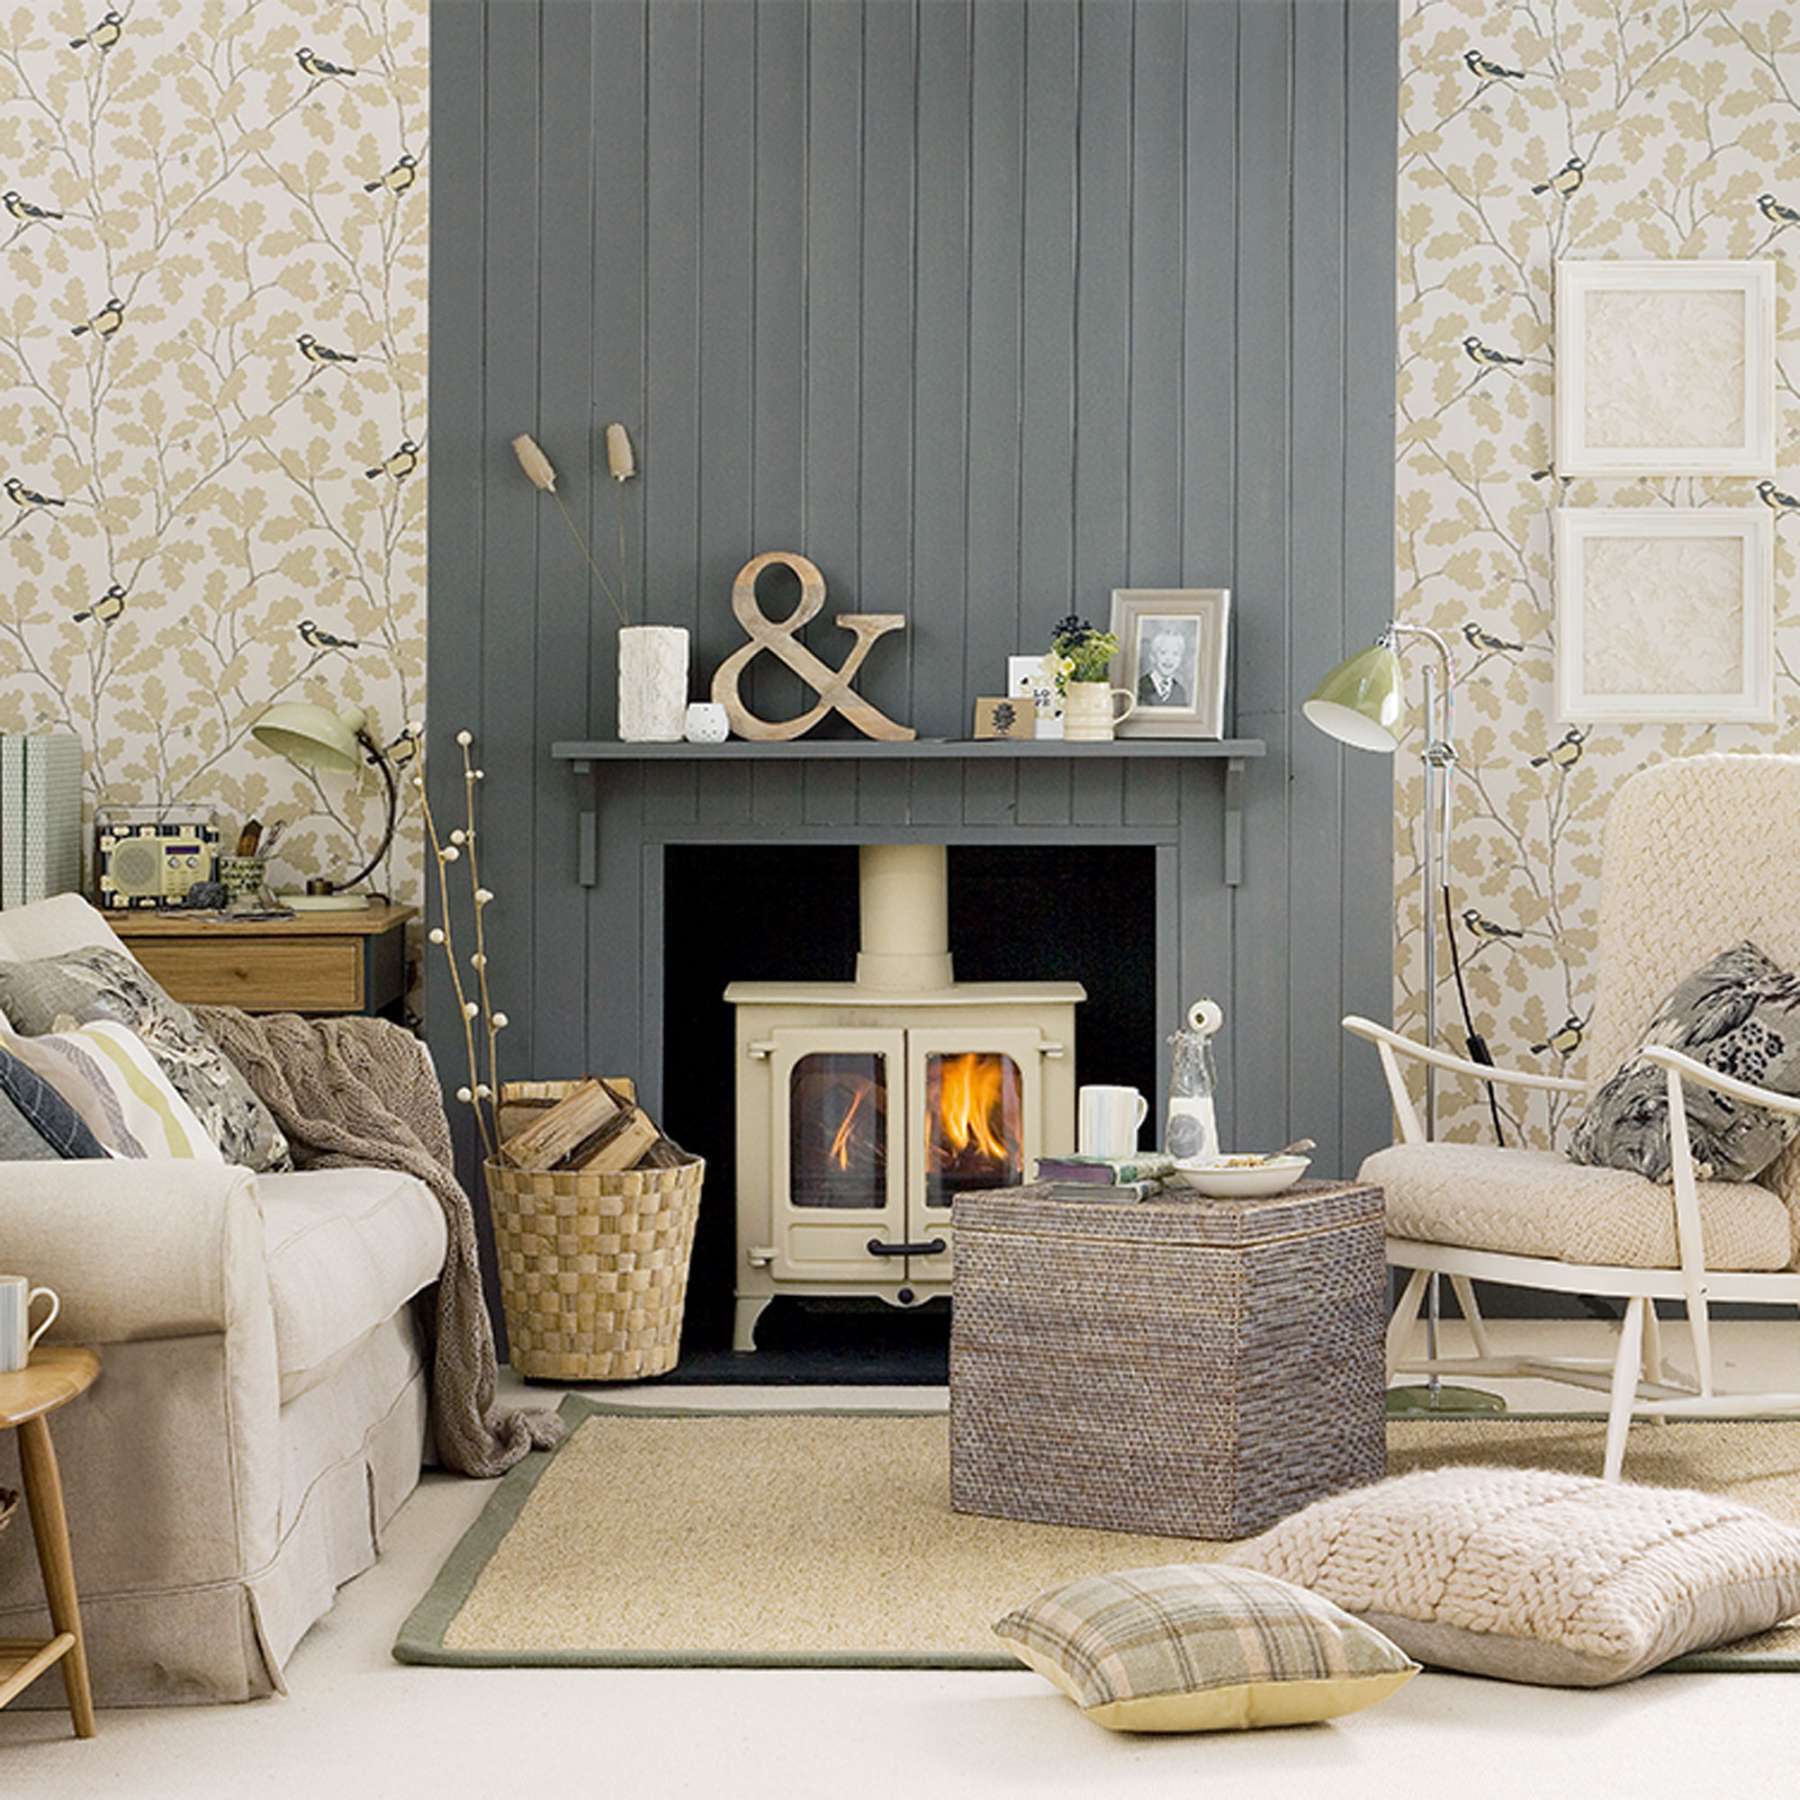 Small living room fireplace ideas:  easy ways to add wow  Ideal